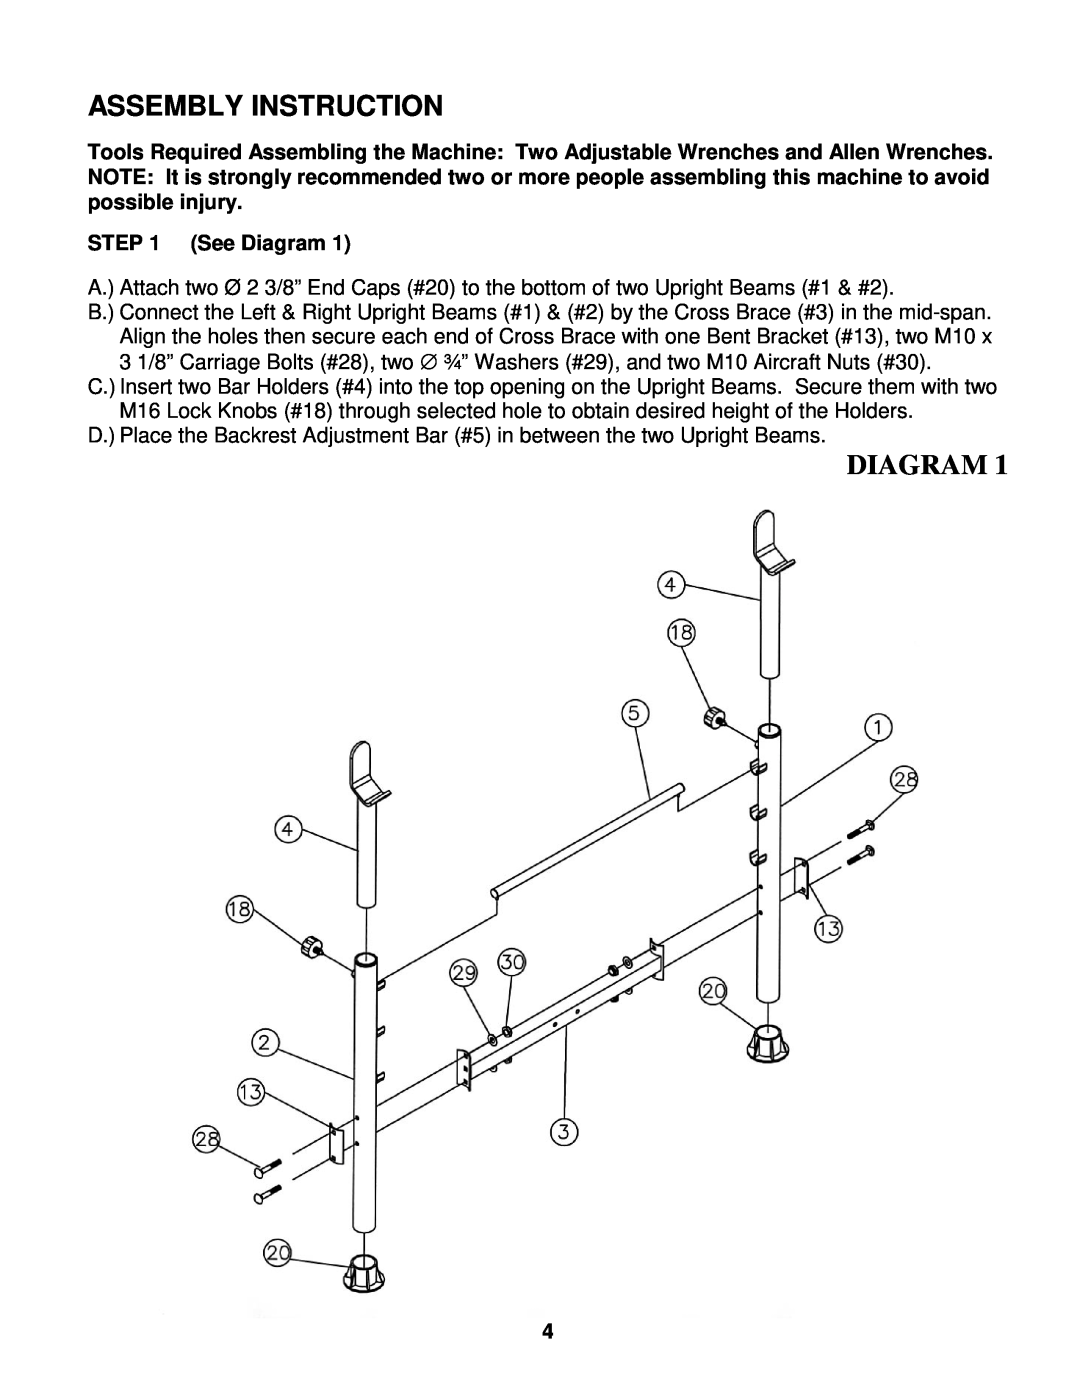 Impex MWB -558 manual Assembly Instruction, Diagram 